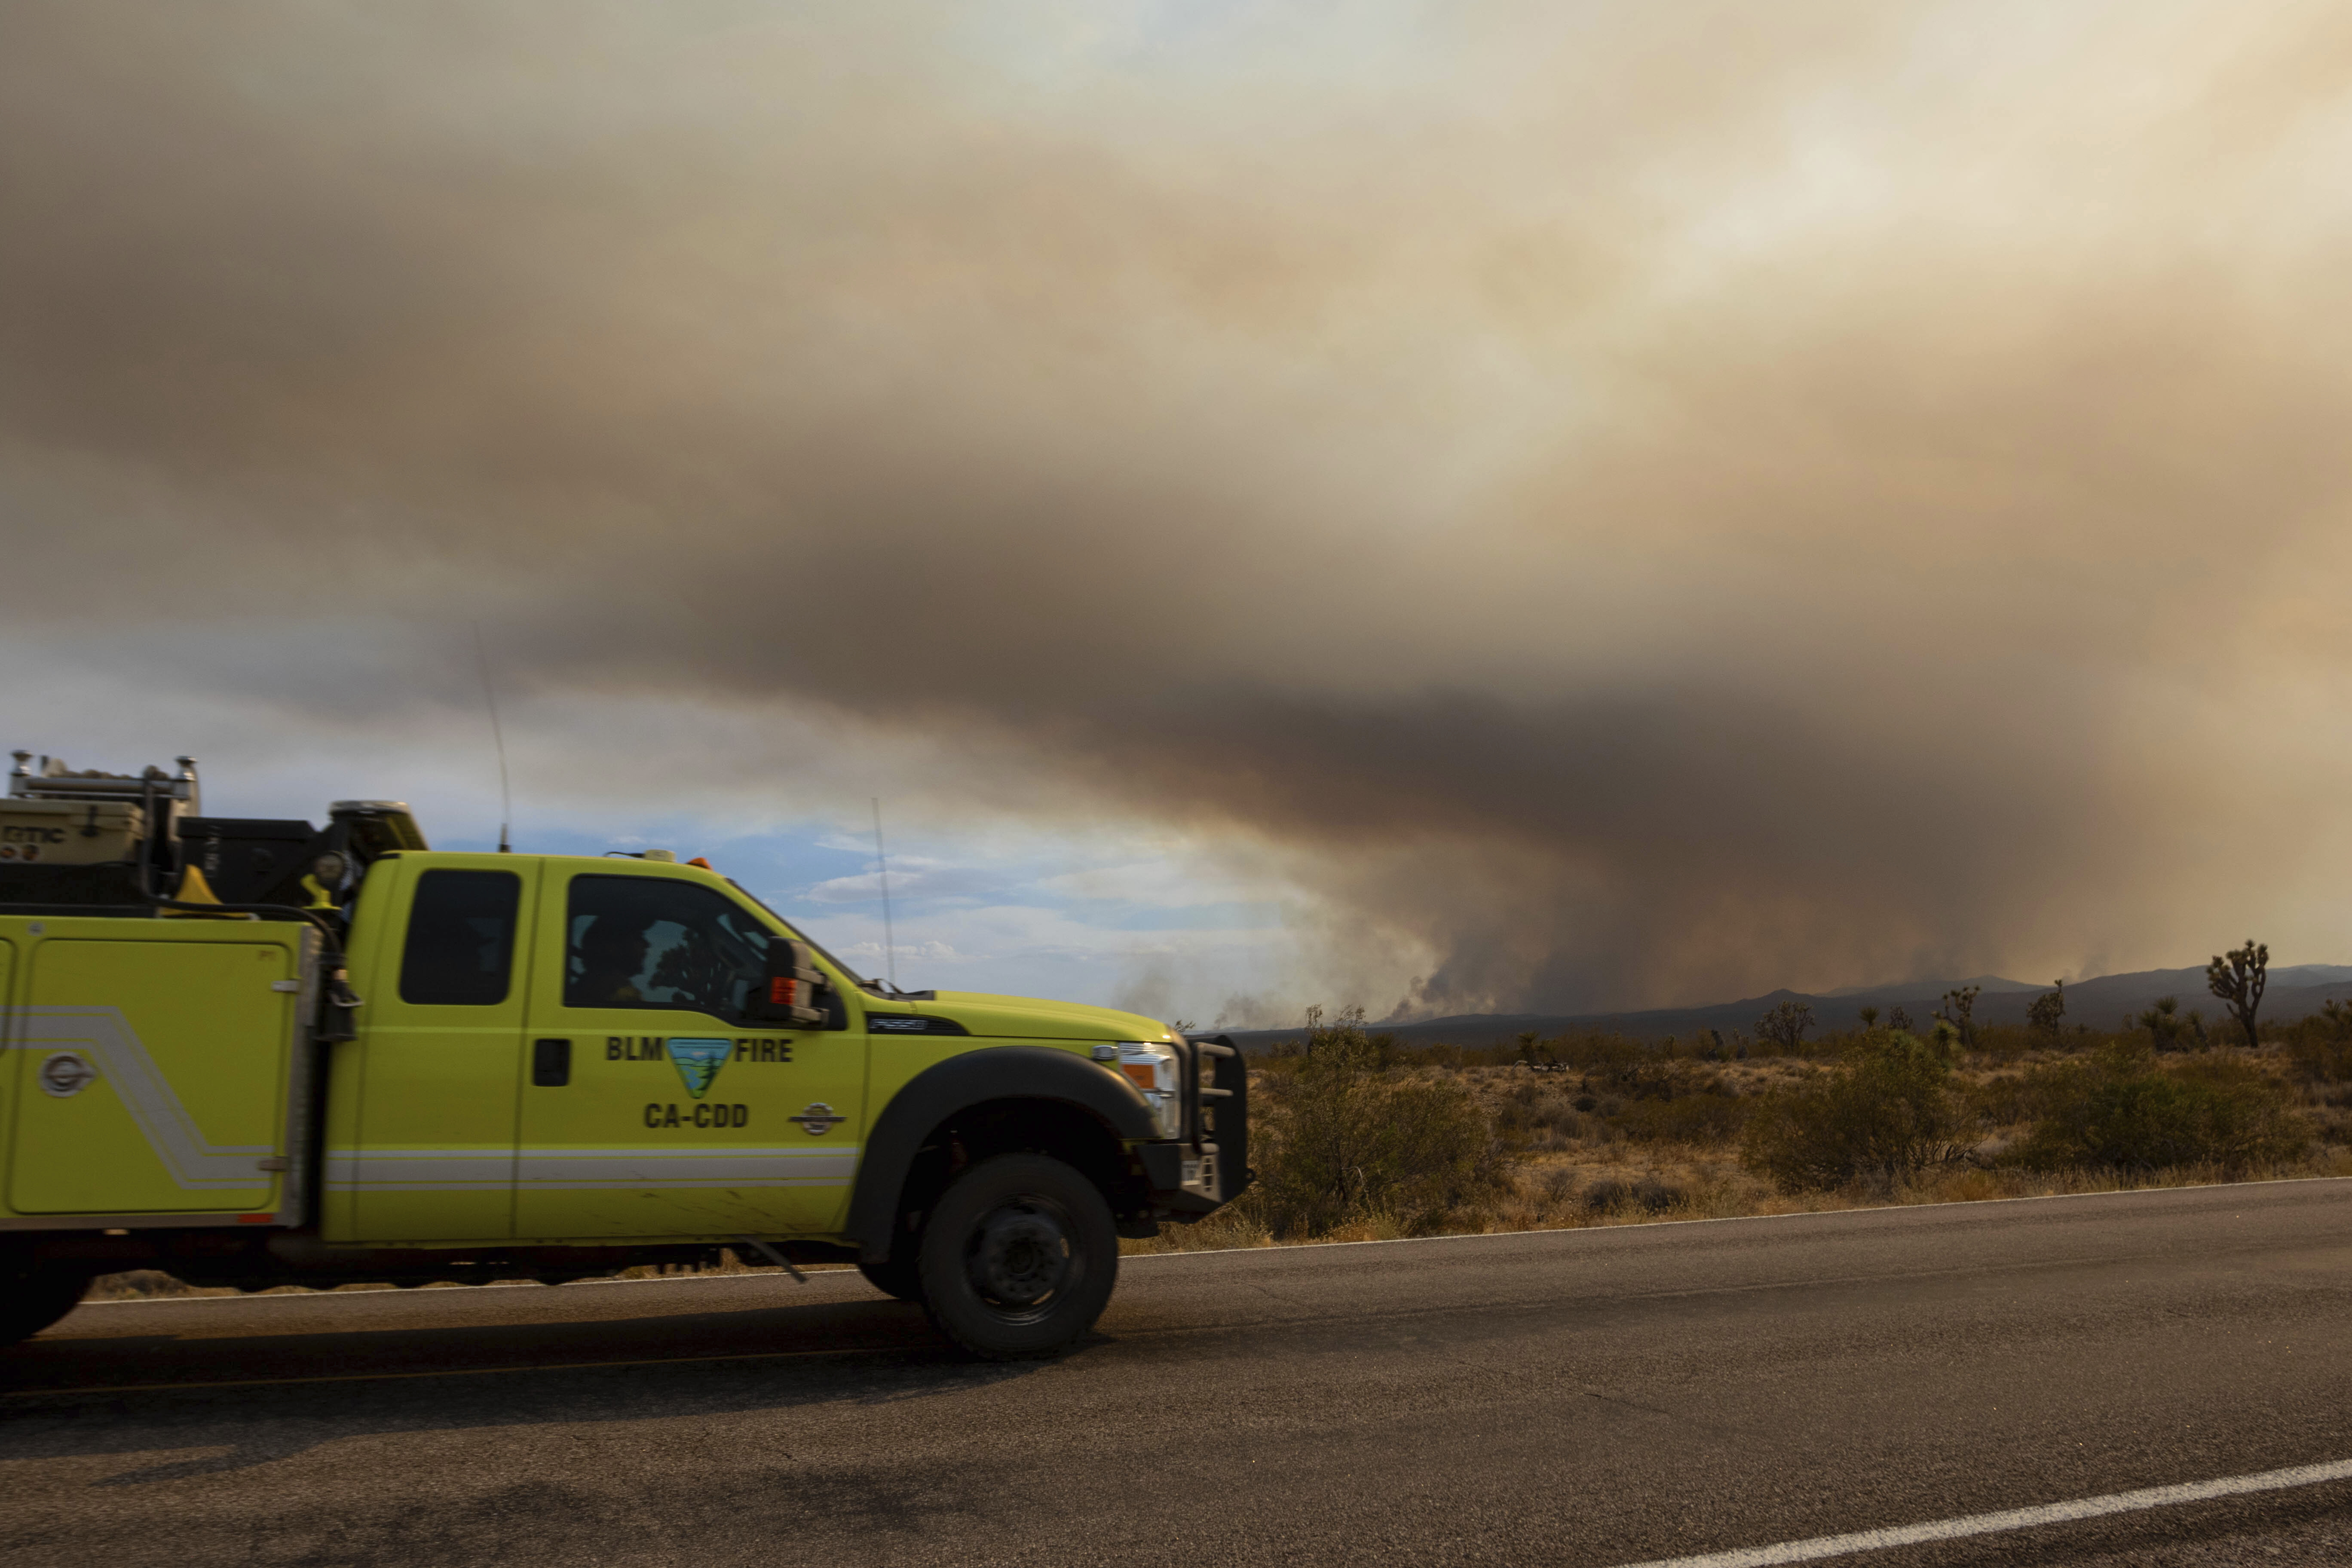 A fire truck heading towards the York Fire on Sunday, July 30, 2023, in the Mojave National Preserve, Calif. The York Fire has burned over 77,000 acres and has 0% containment. (AP Photo/Ty ONeil)